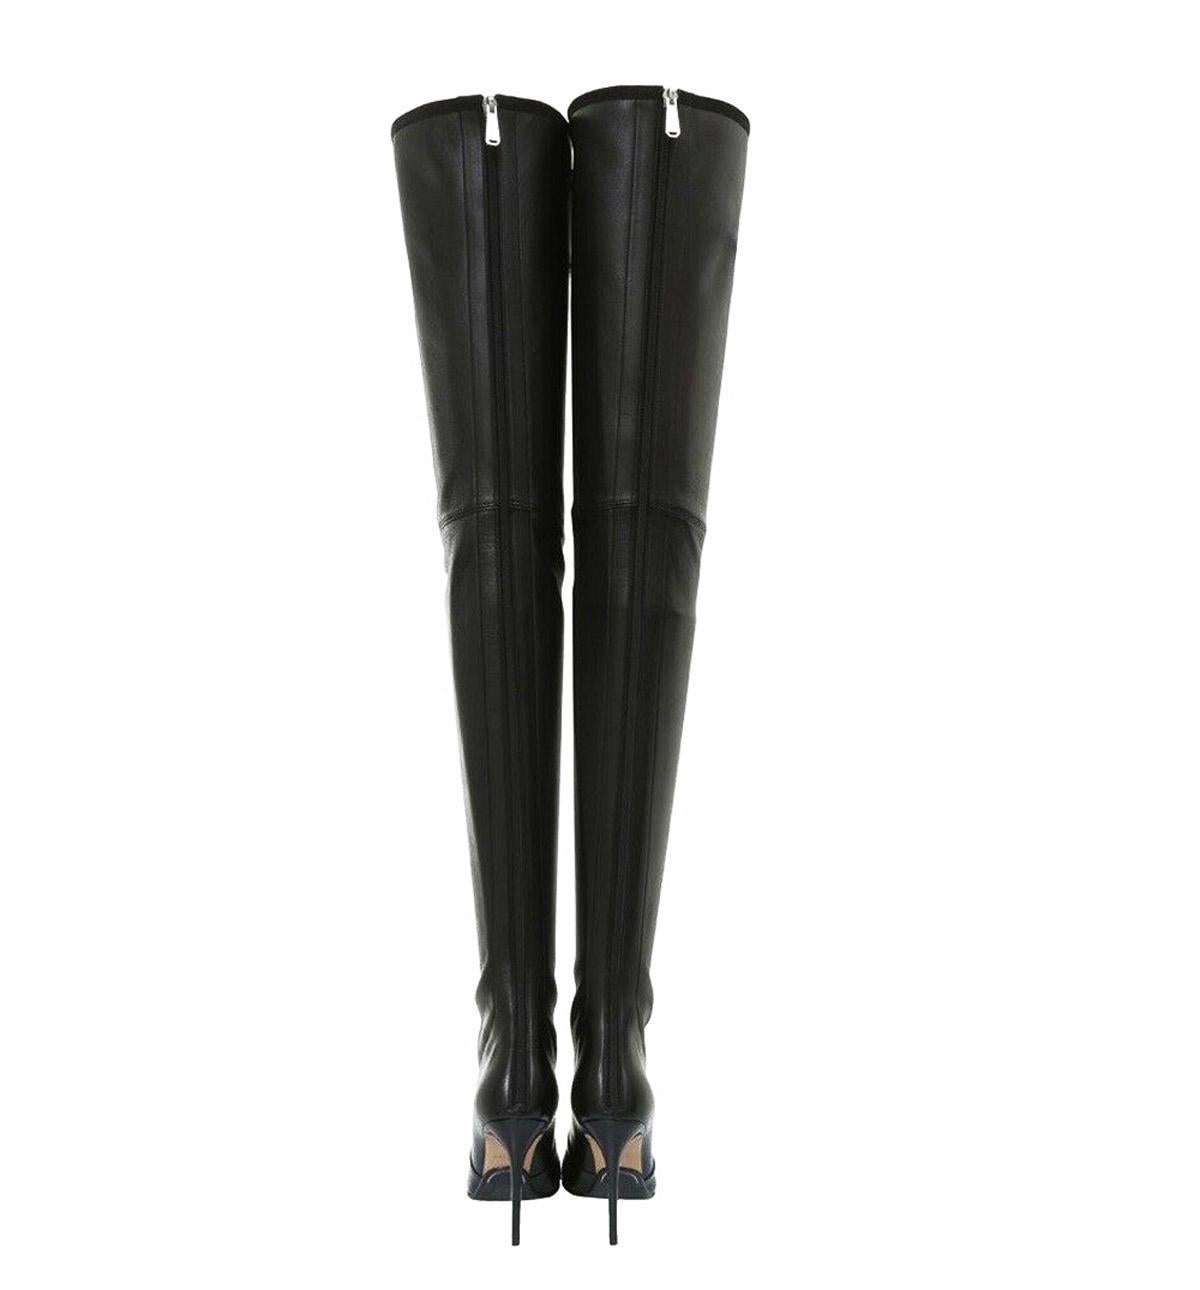 New Balmain Black Stretch Leather Over-the-Knee Thigh-High Boots
Designer sizes available -  36, 37, 37.5, 38.
According to Balmain Store US sizes will be 7, 8, 8.5, 9.
Soft Stretch Leather, 100% Lambskin, Back Zip Closure, Pointed